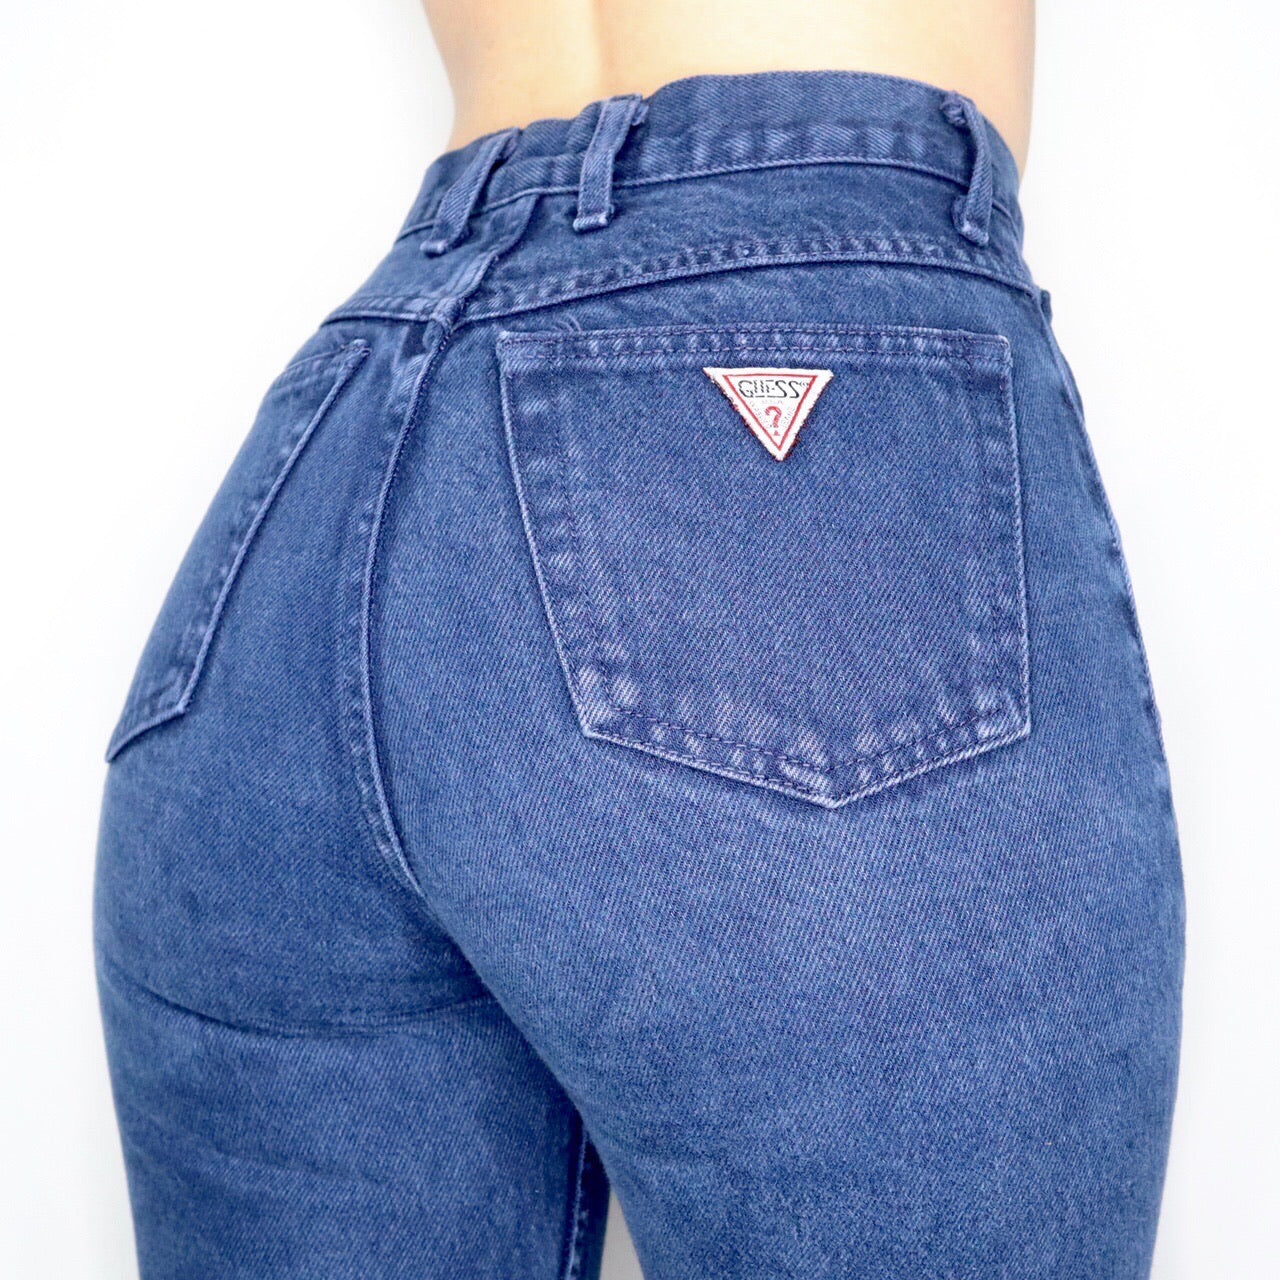 Vintage 80s Navy Blue Guess High Waisted Jeans